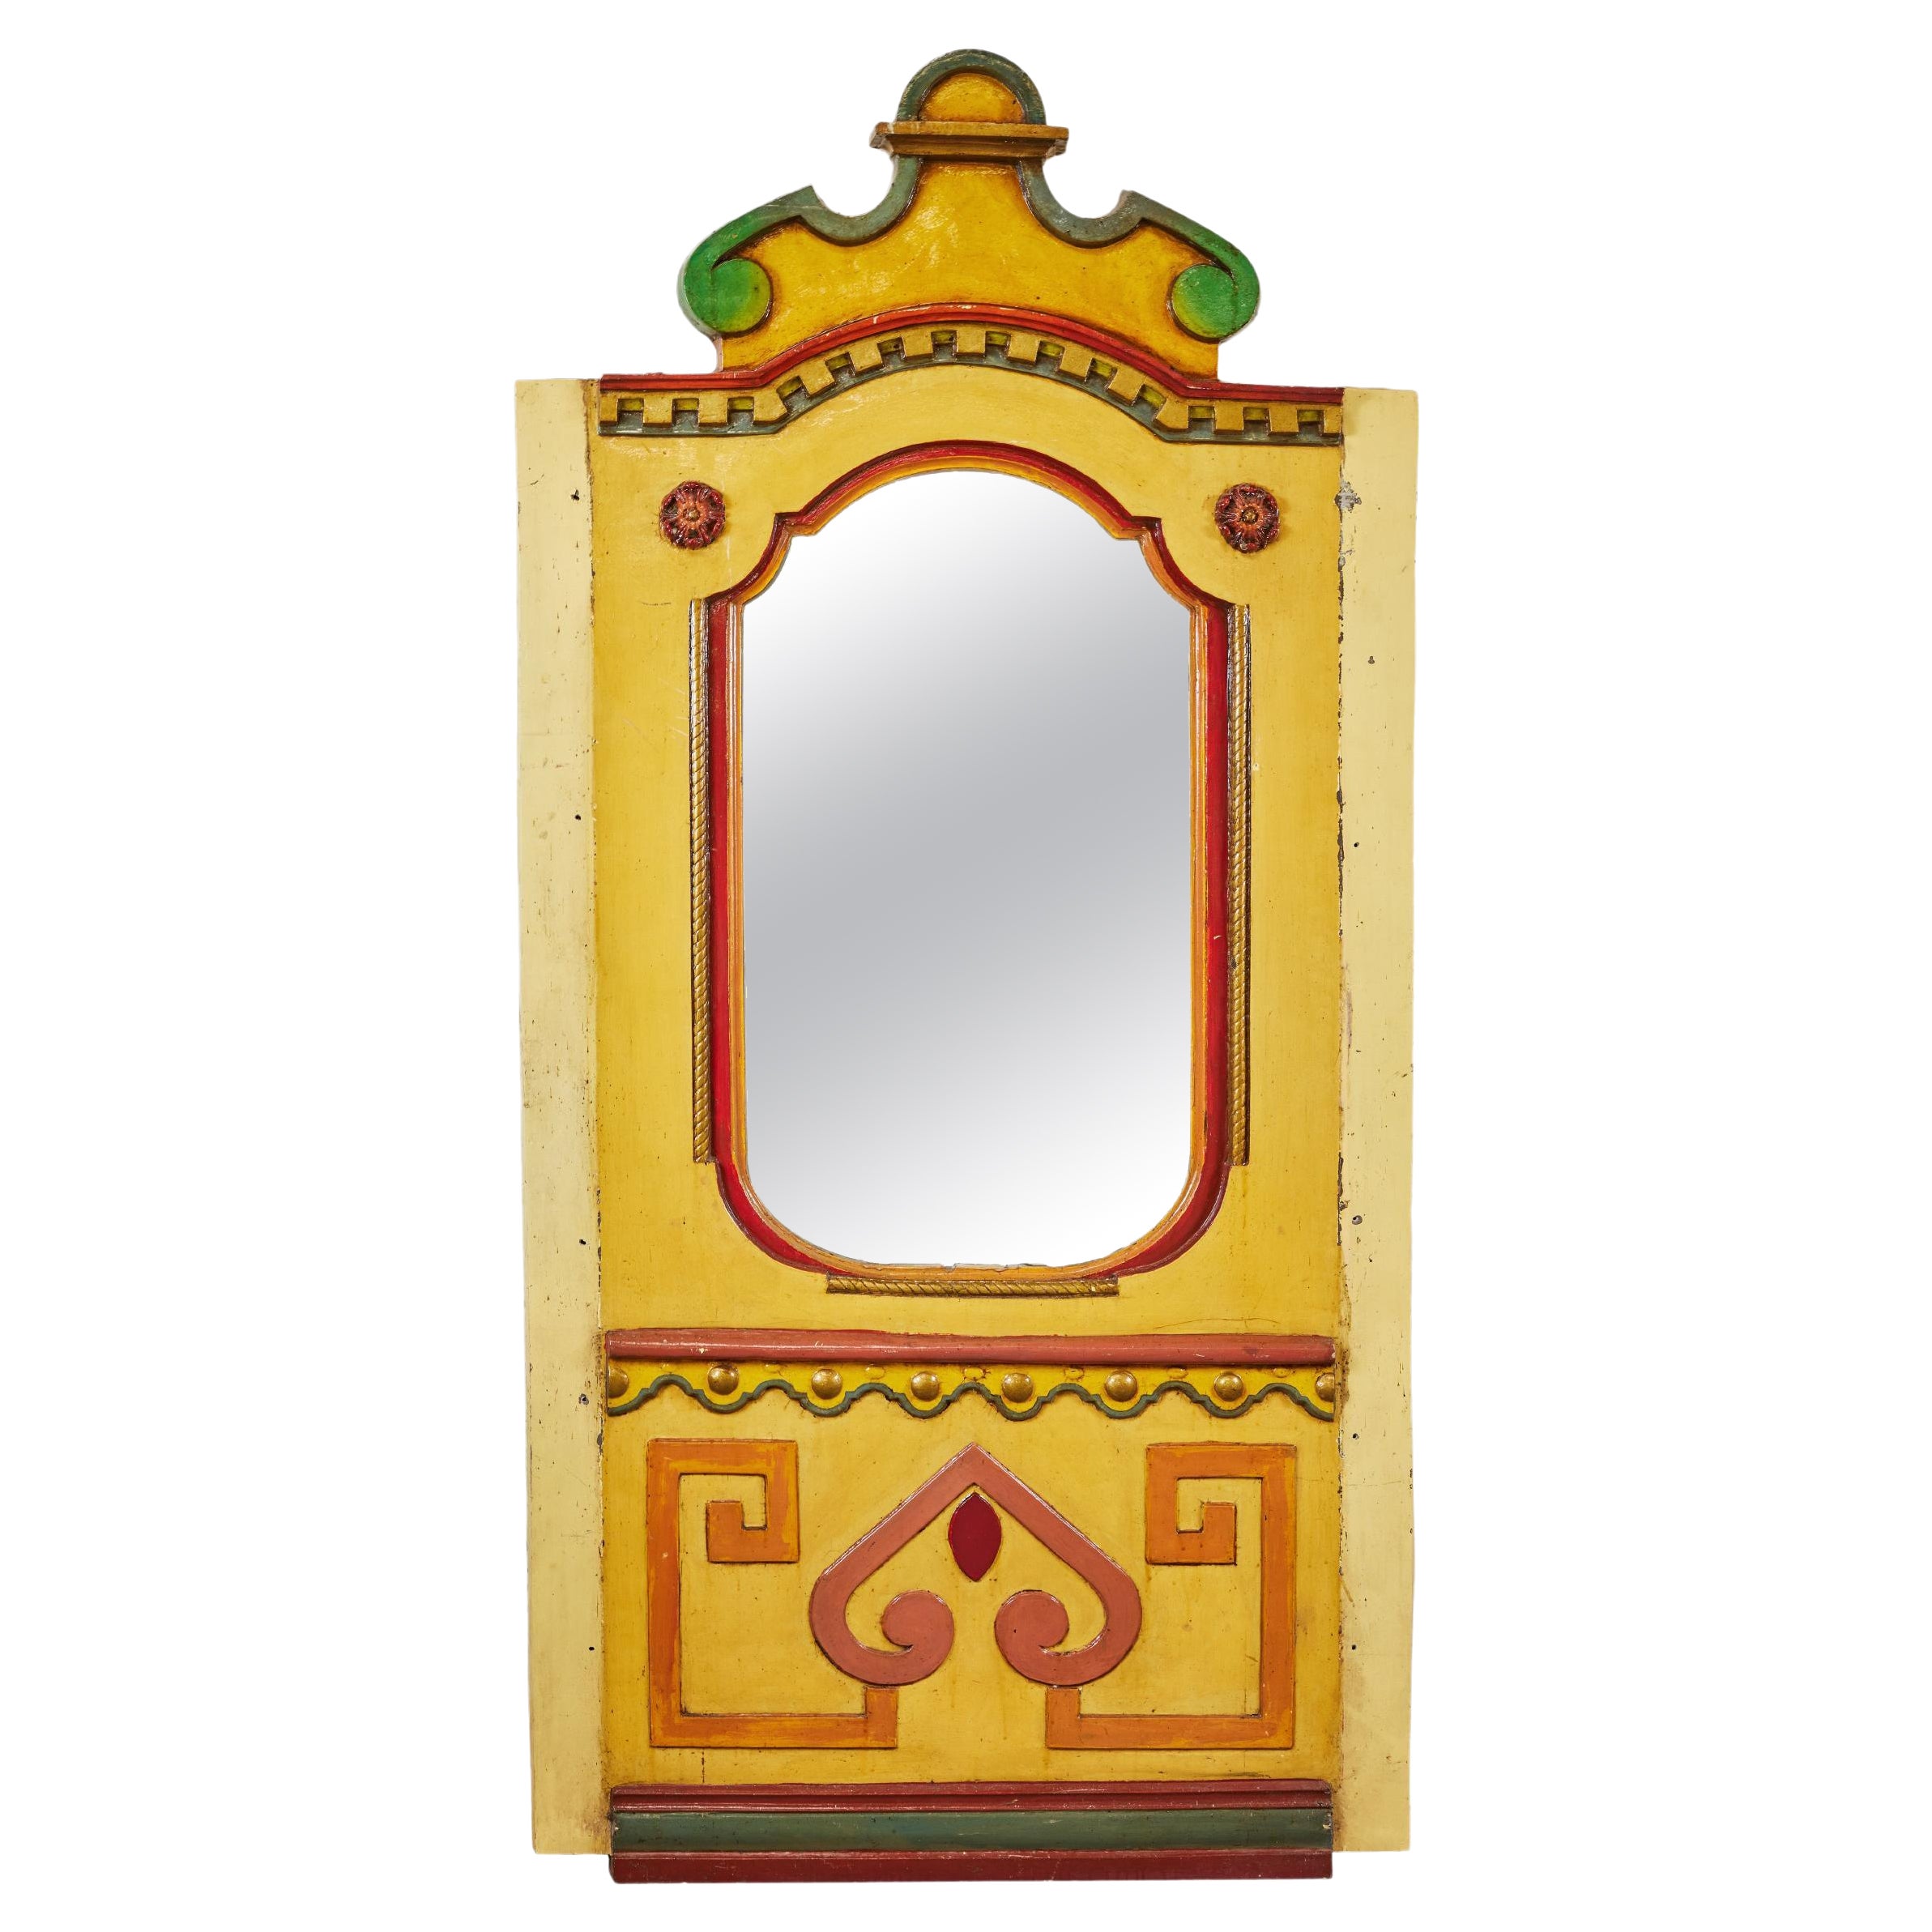 Giant Wood Carved Carousel Carnival Pier Mirror